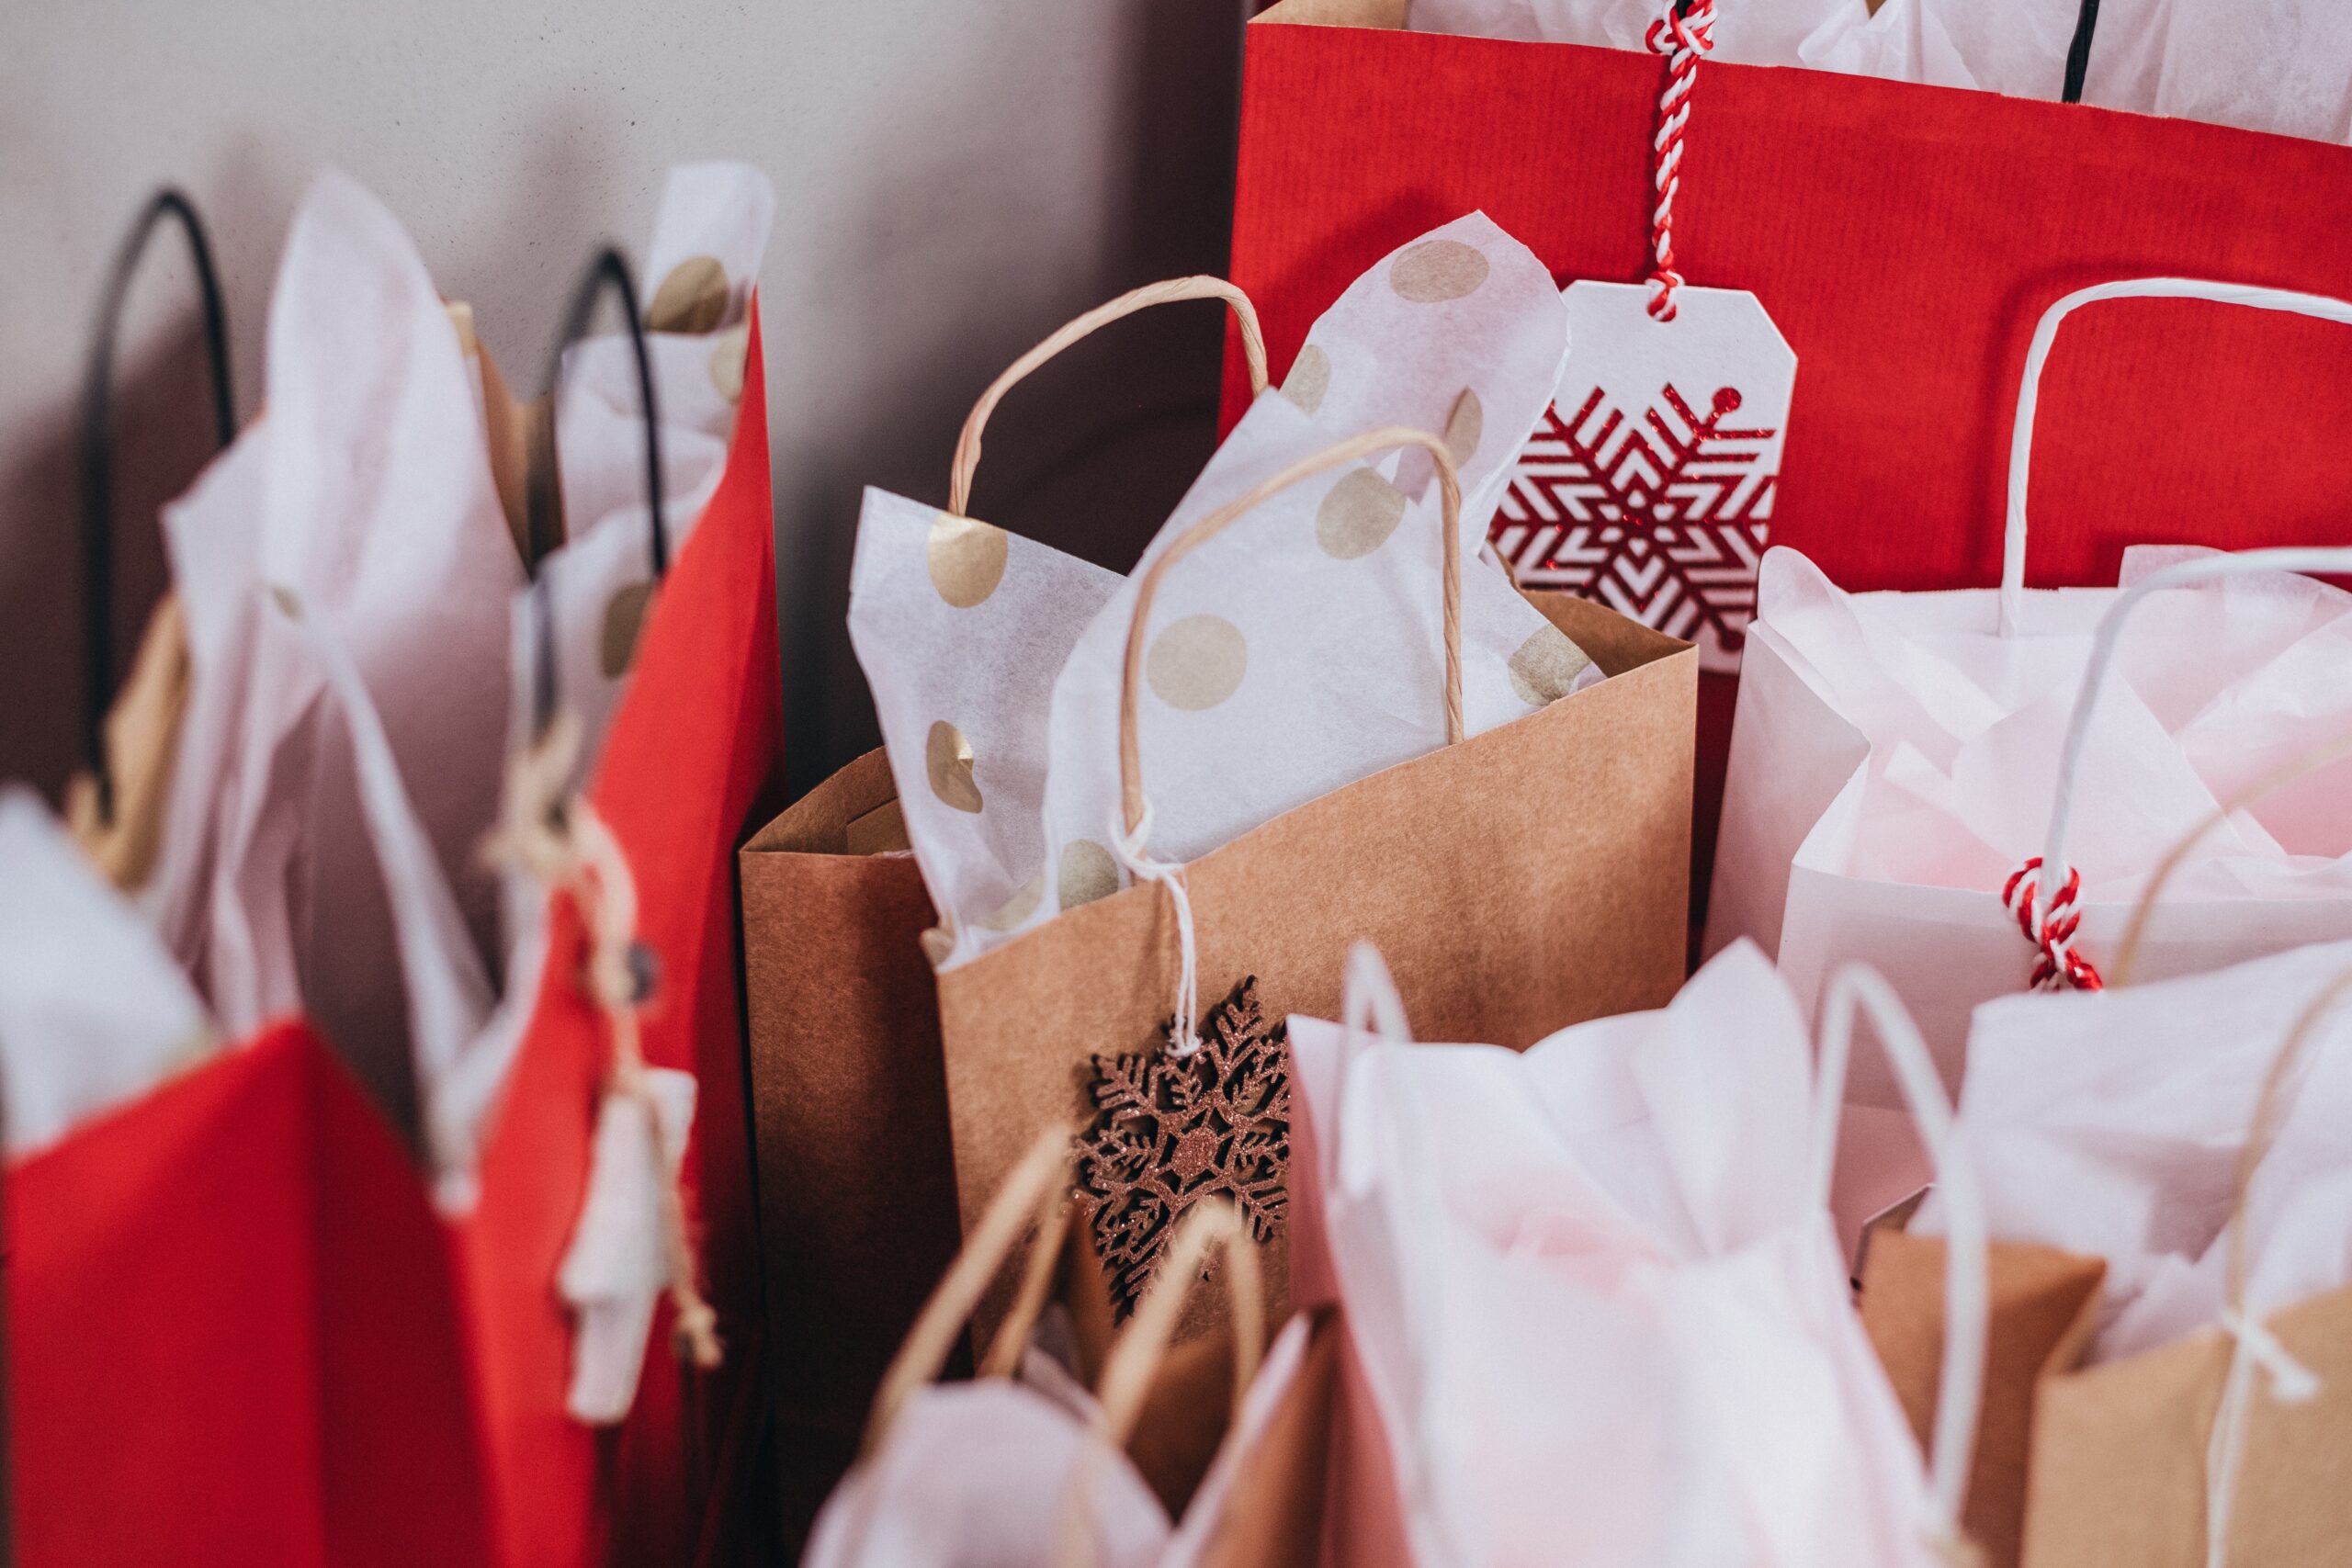 No Friendsgiving is complete without gifts for your guests. This idea will make your friends feel appreciated and will have them wanting to come to your party every year. Pictured: Gift bags.